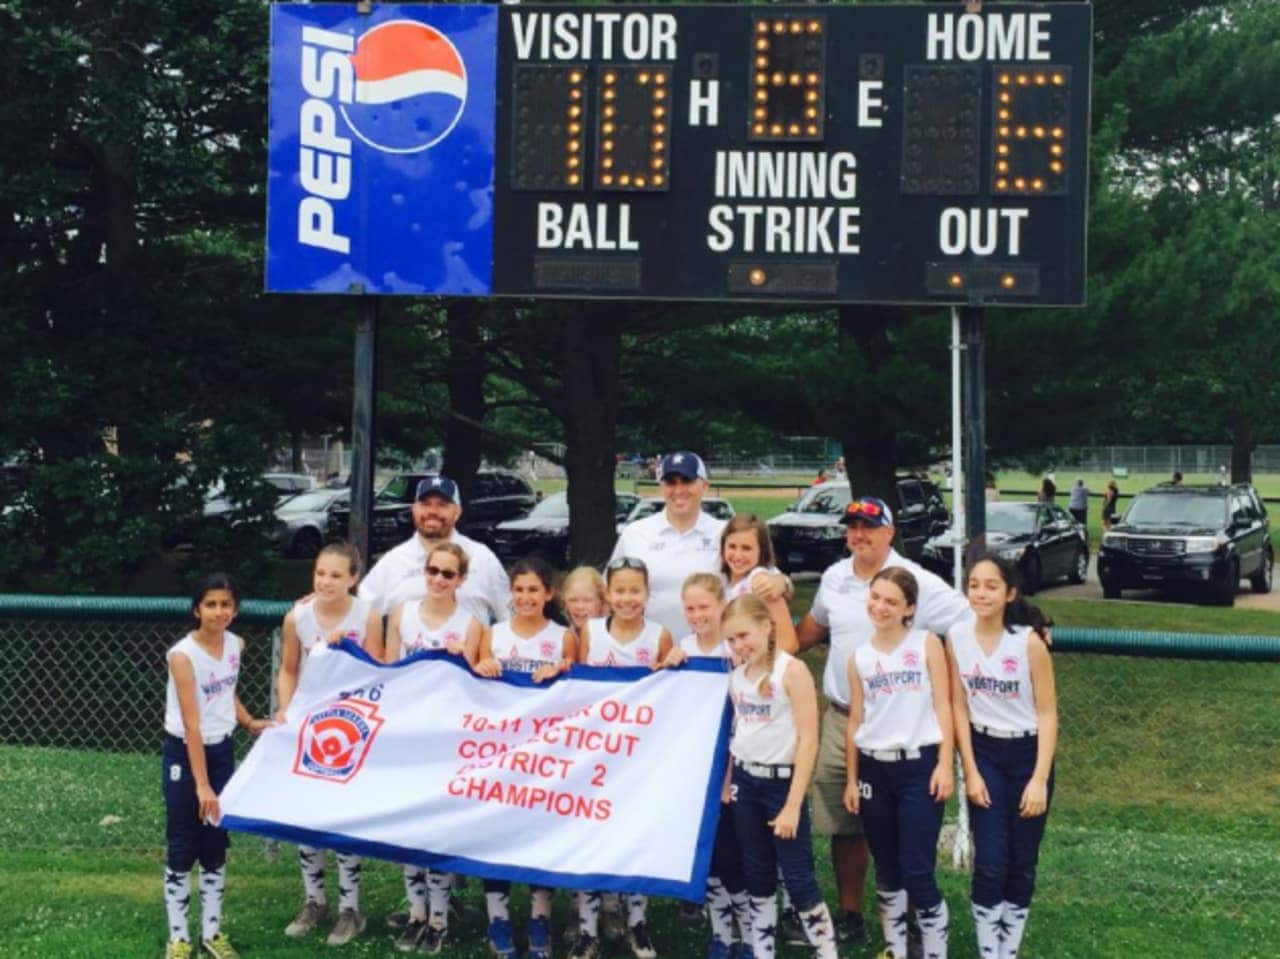 The Westport 11-year-old softball team captured the state championship.